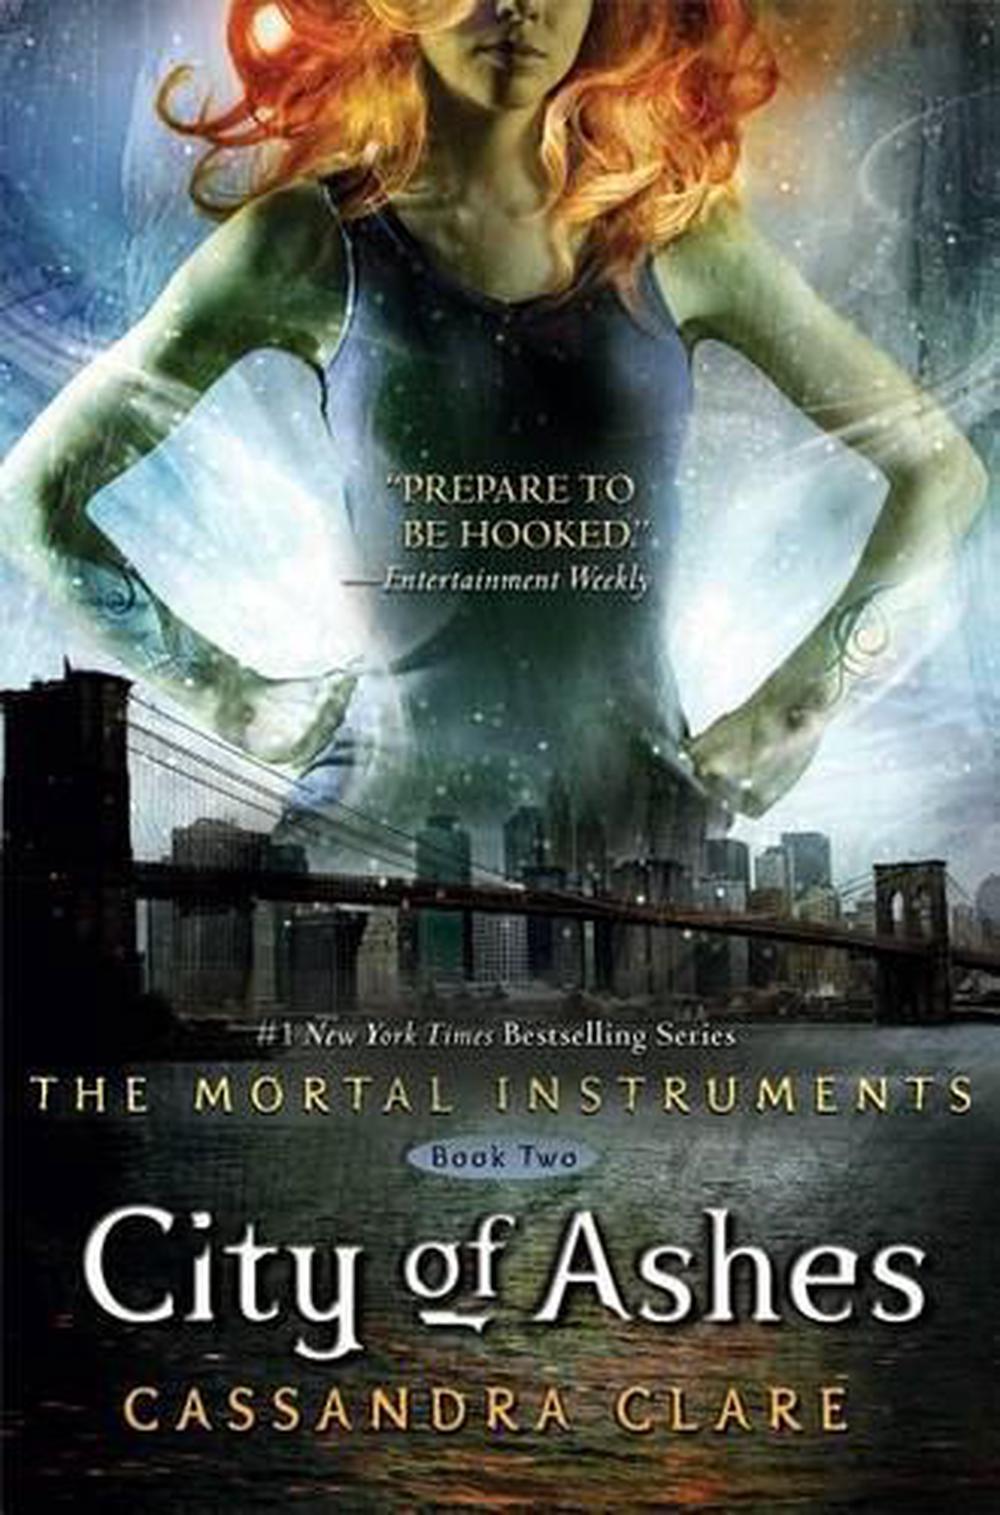 City of Bones (The Mortal Instruments Series #1) by Cassandra Clare,  Paperback